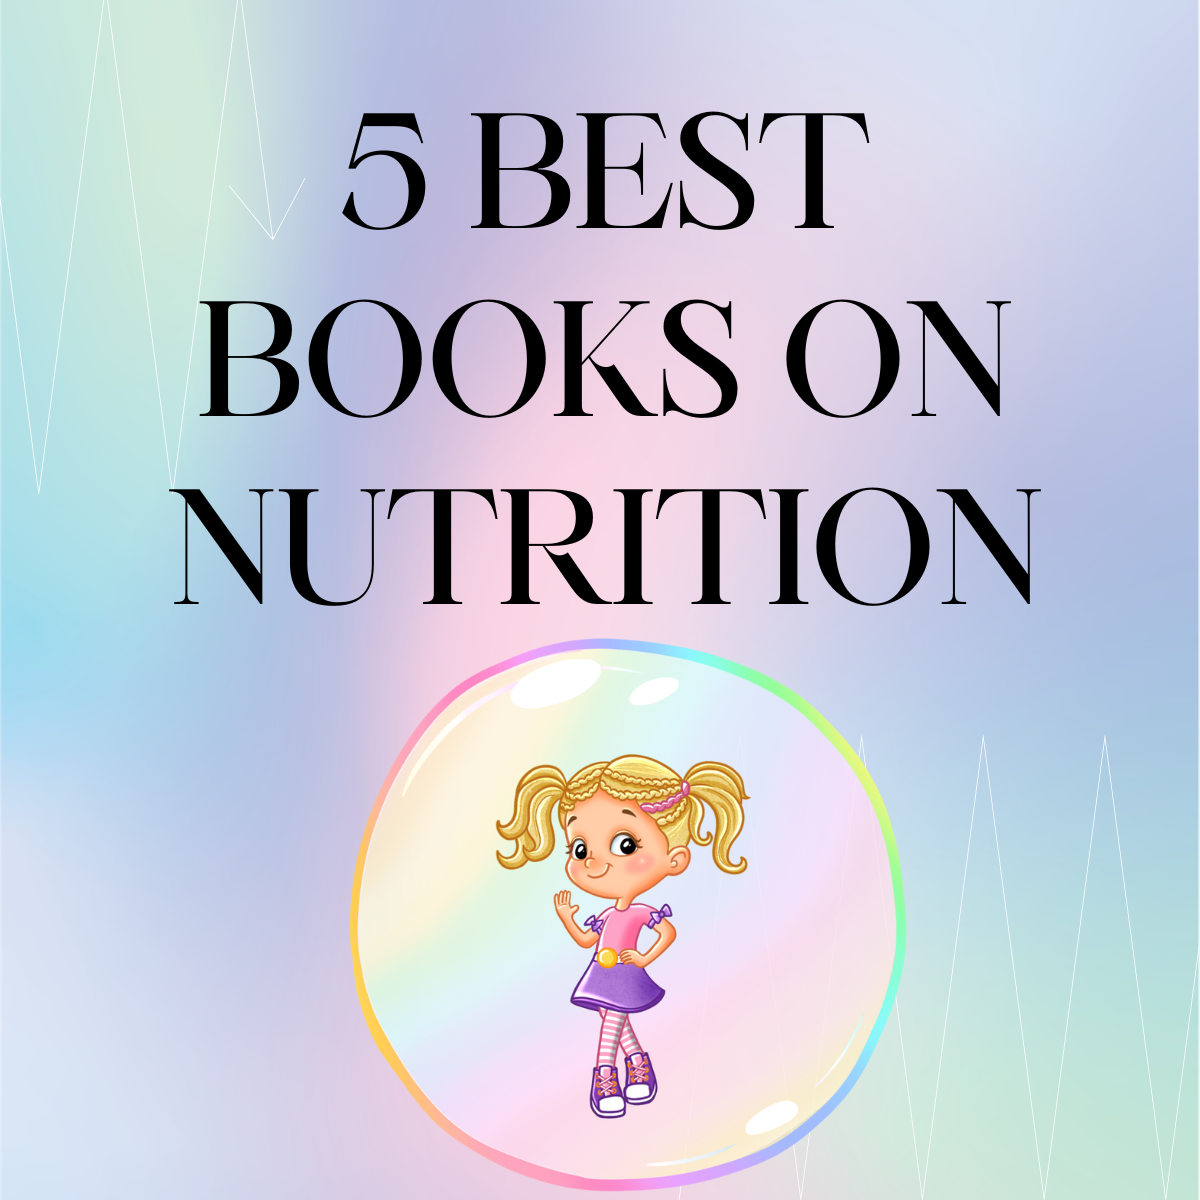 nutrition, healthy eating, children's books on nutrition, children's books on healthy eating